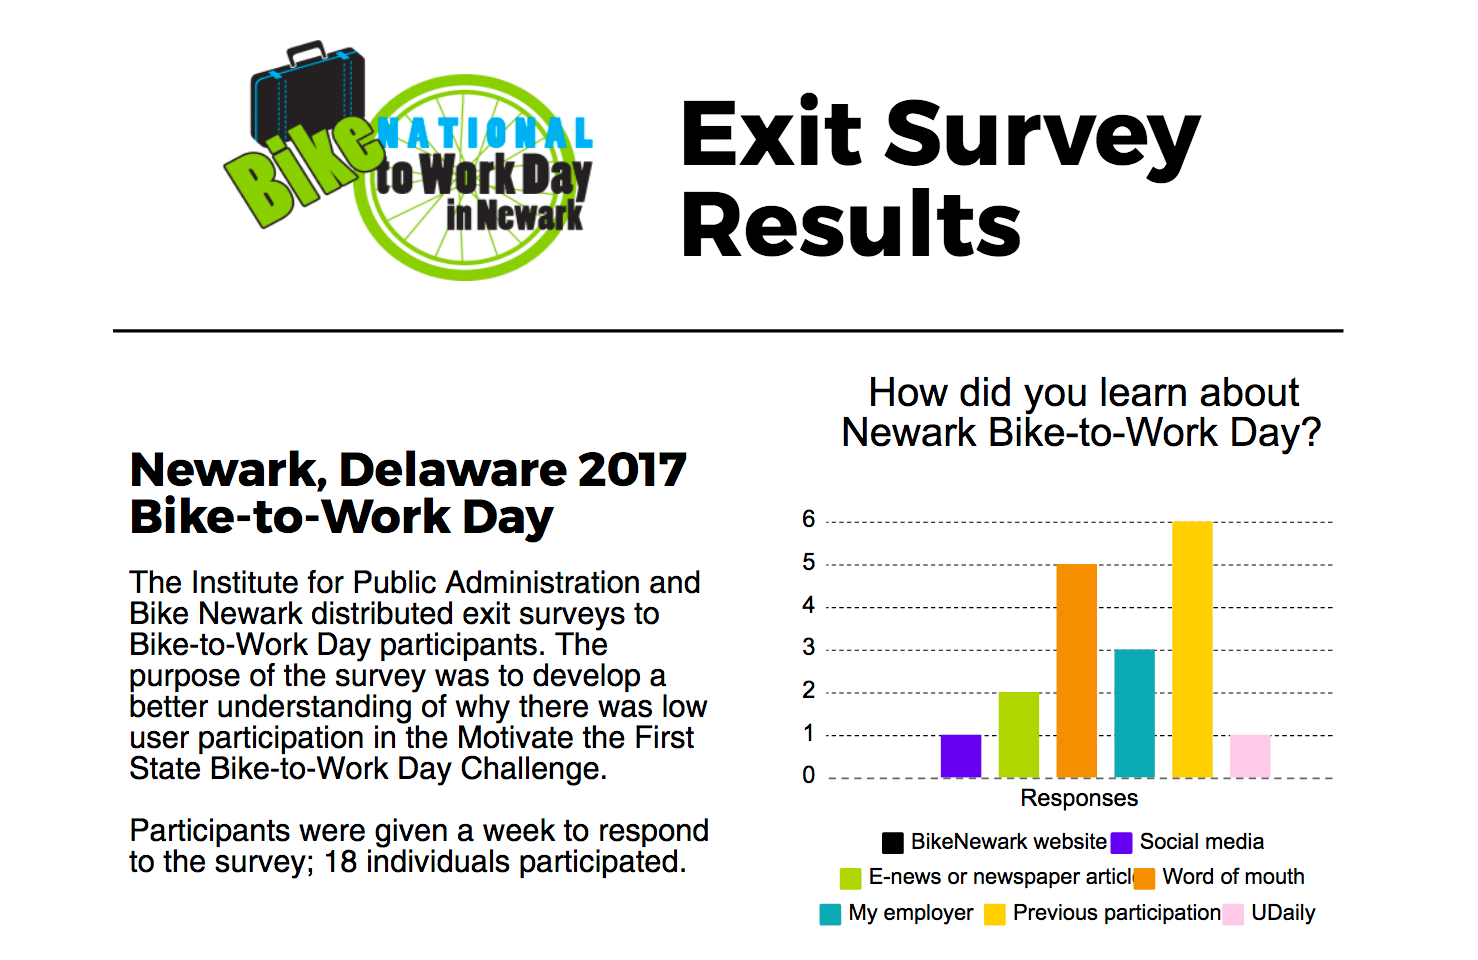 Screen capture of Newark, Delaware 2017 Bike-to-Work Day & Motivate the First State Challenge Piktochart